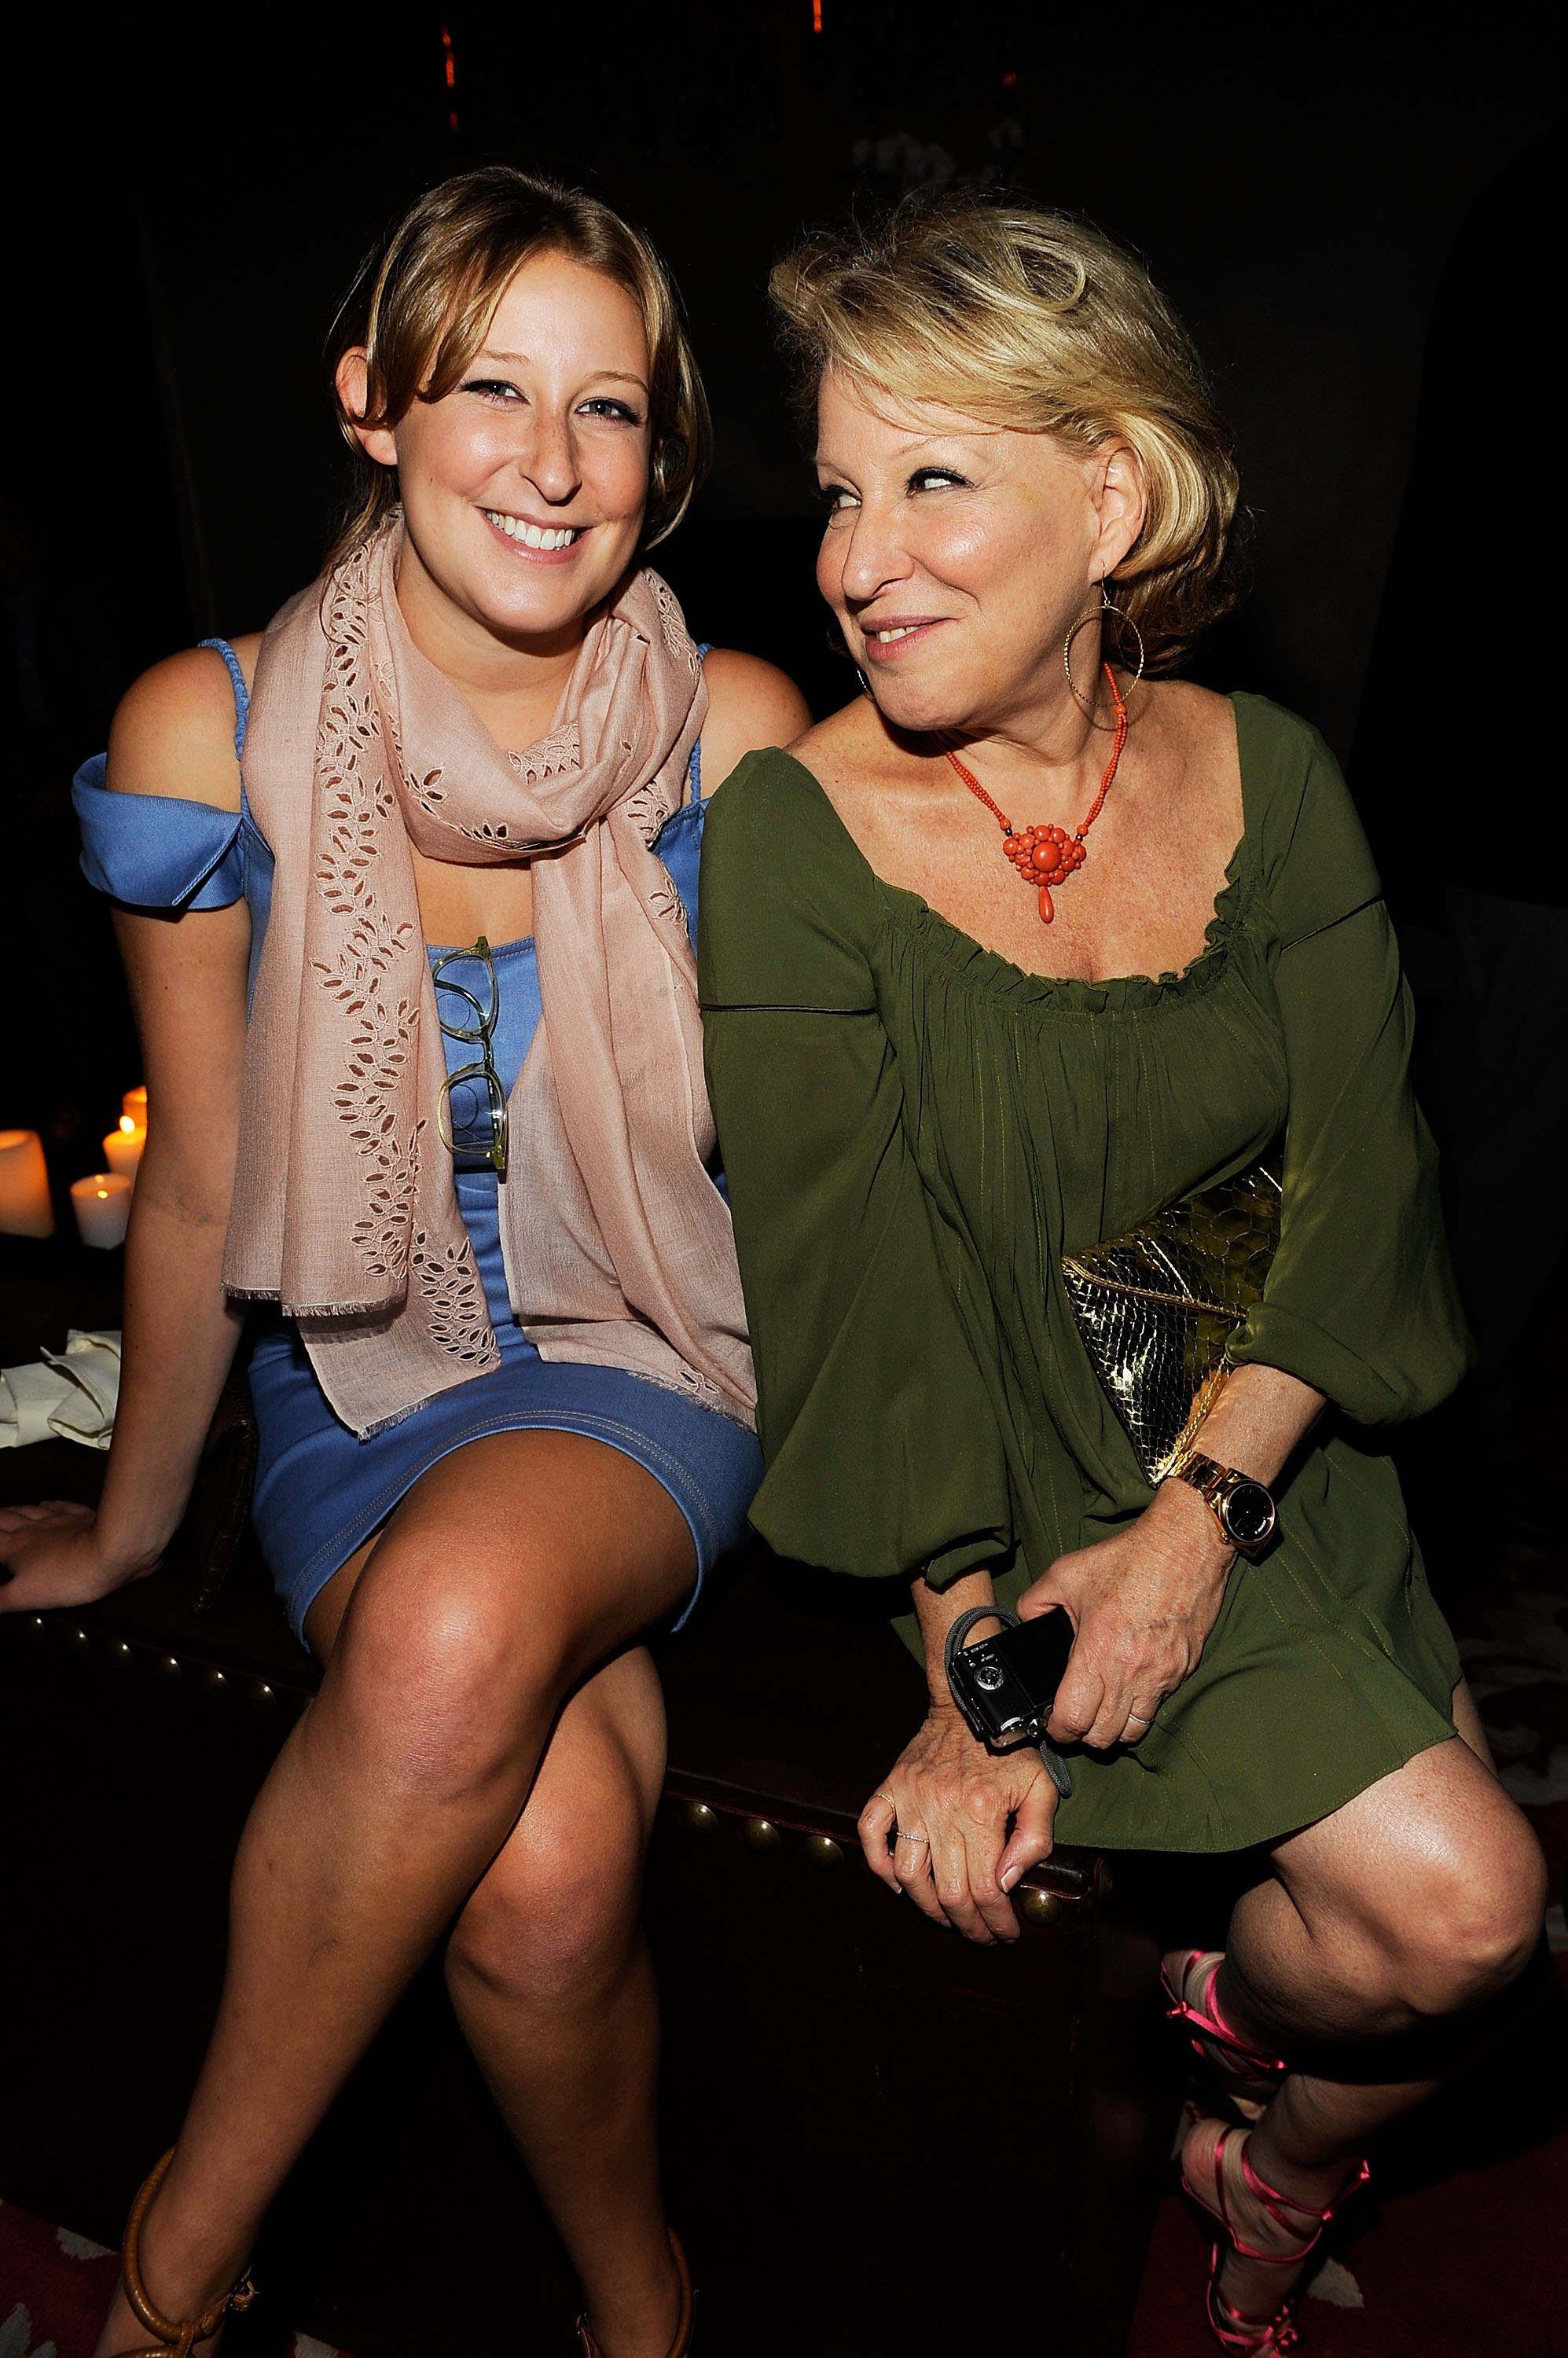 Sophie von Haselberg and Bette Midler at the after-party for the Cinema Society screening of "The Women" in New York City, 2008 | Source: Getty Images